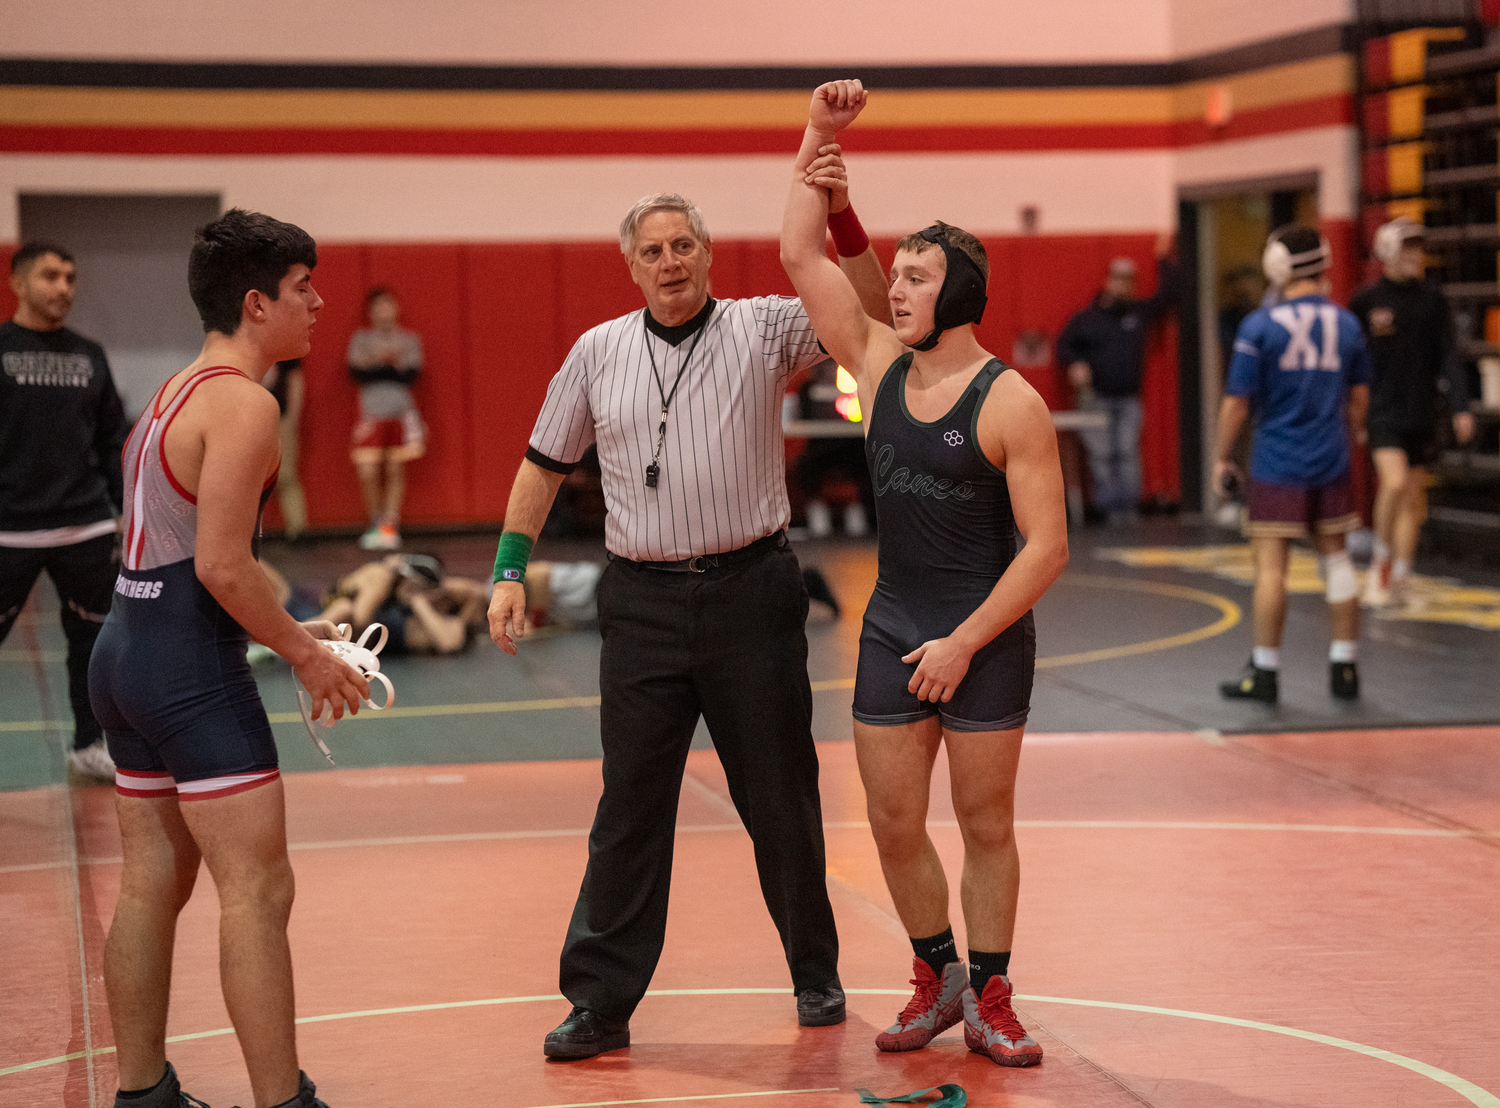 Aidan Caruana gets his arm raised after a victory.  RON ESPOSITO